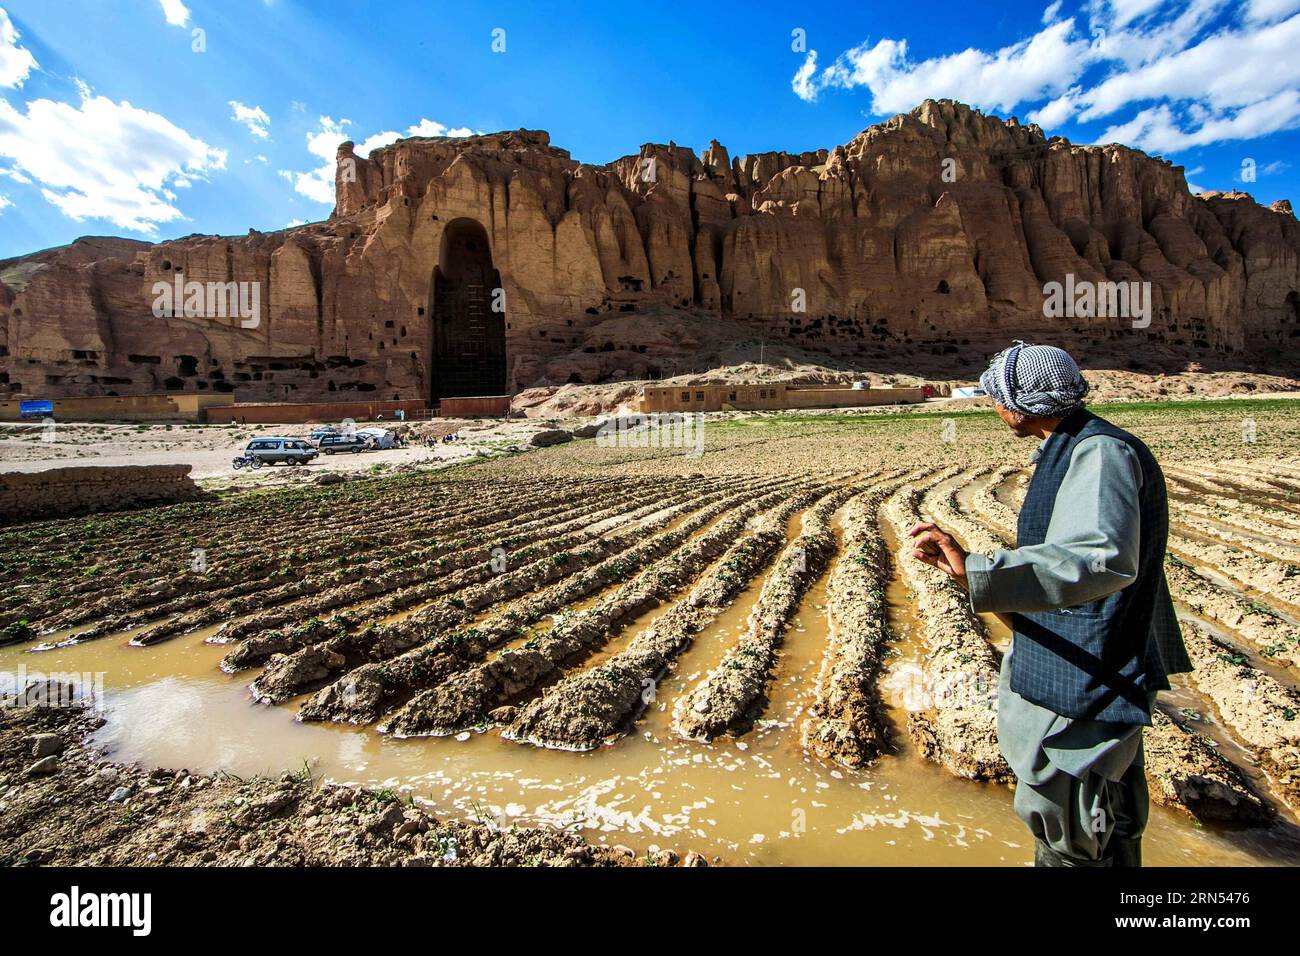 (150612) -- KABUL, June 12, 2015 -- A farmer works near the place where the Bamyan Buddha was located in Bamyan province, central Afghanistan, June 7, 2015. A Chinese couple, and Liang Hong, successfully projected the image of the tallest Buddha in Bamyan Valley on June 6 and 7, using the latest cultural relics-friendly technology, eliciting cheers from the local people. The two Bamyan Buddhas were bombed and smashed to the ground by Taliban in 2001 despite appeals from the international community. ) AFGHANISTAN-BAMYAN-BAMYAN BUDDHA-IMAGE PROJECTION ZhangxXinyu PUBLICATIONxNOTxINxCHN   150612 Stock Photo